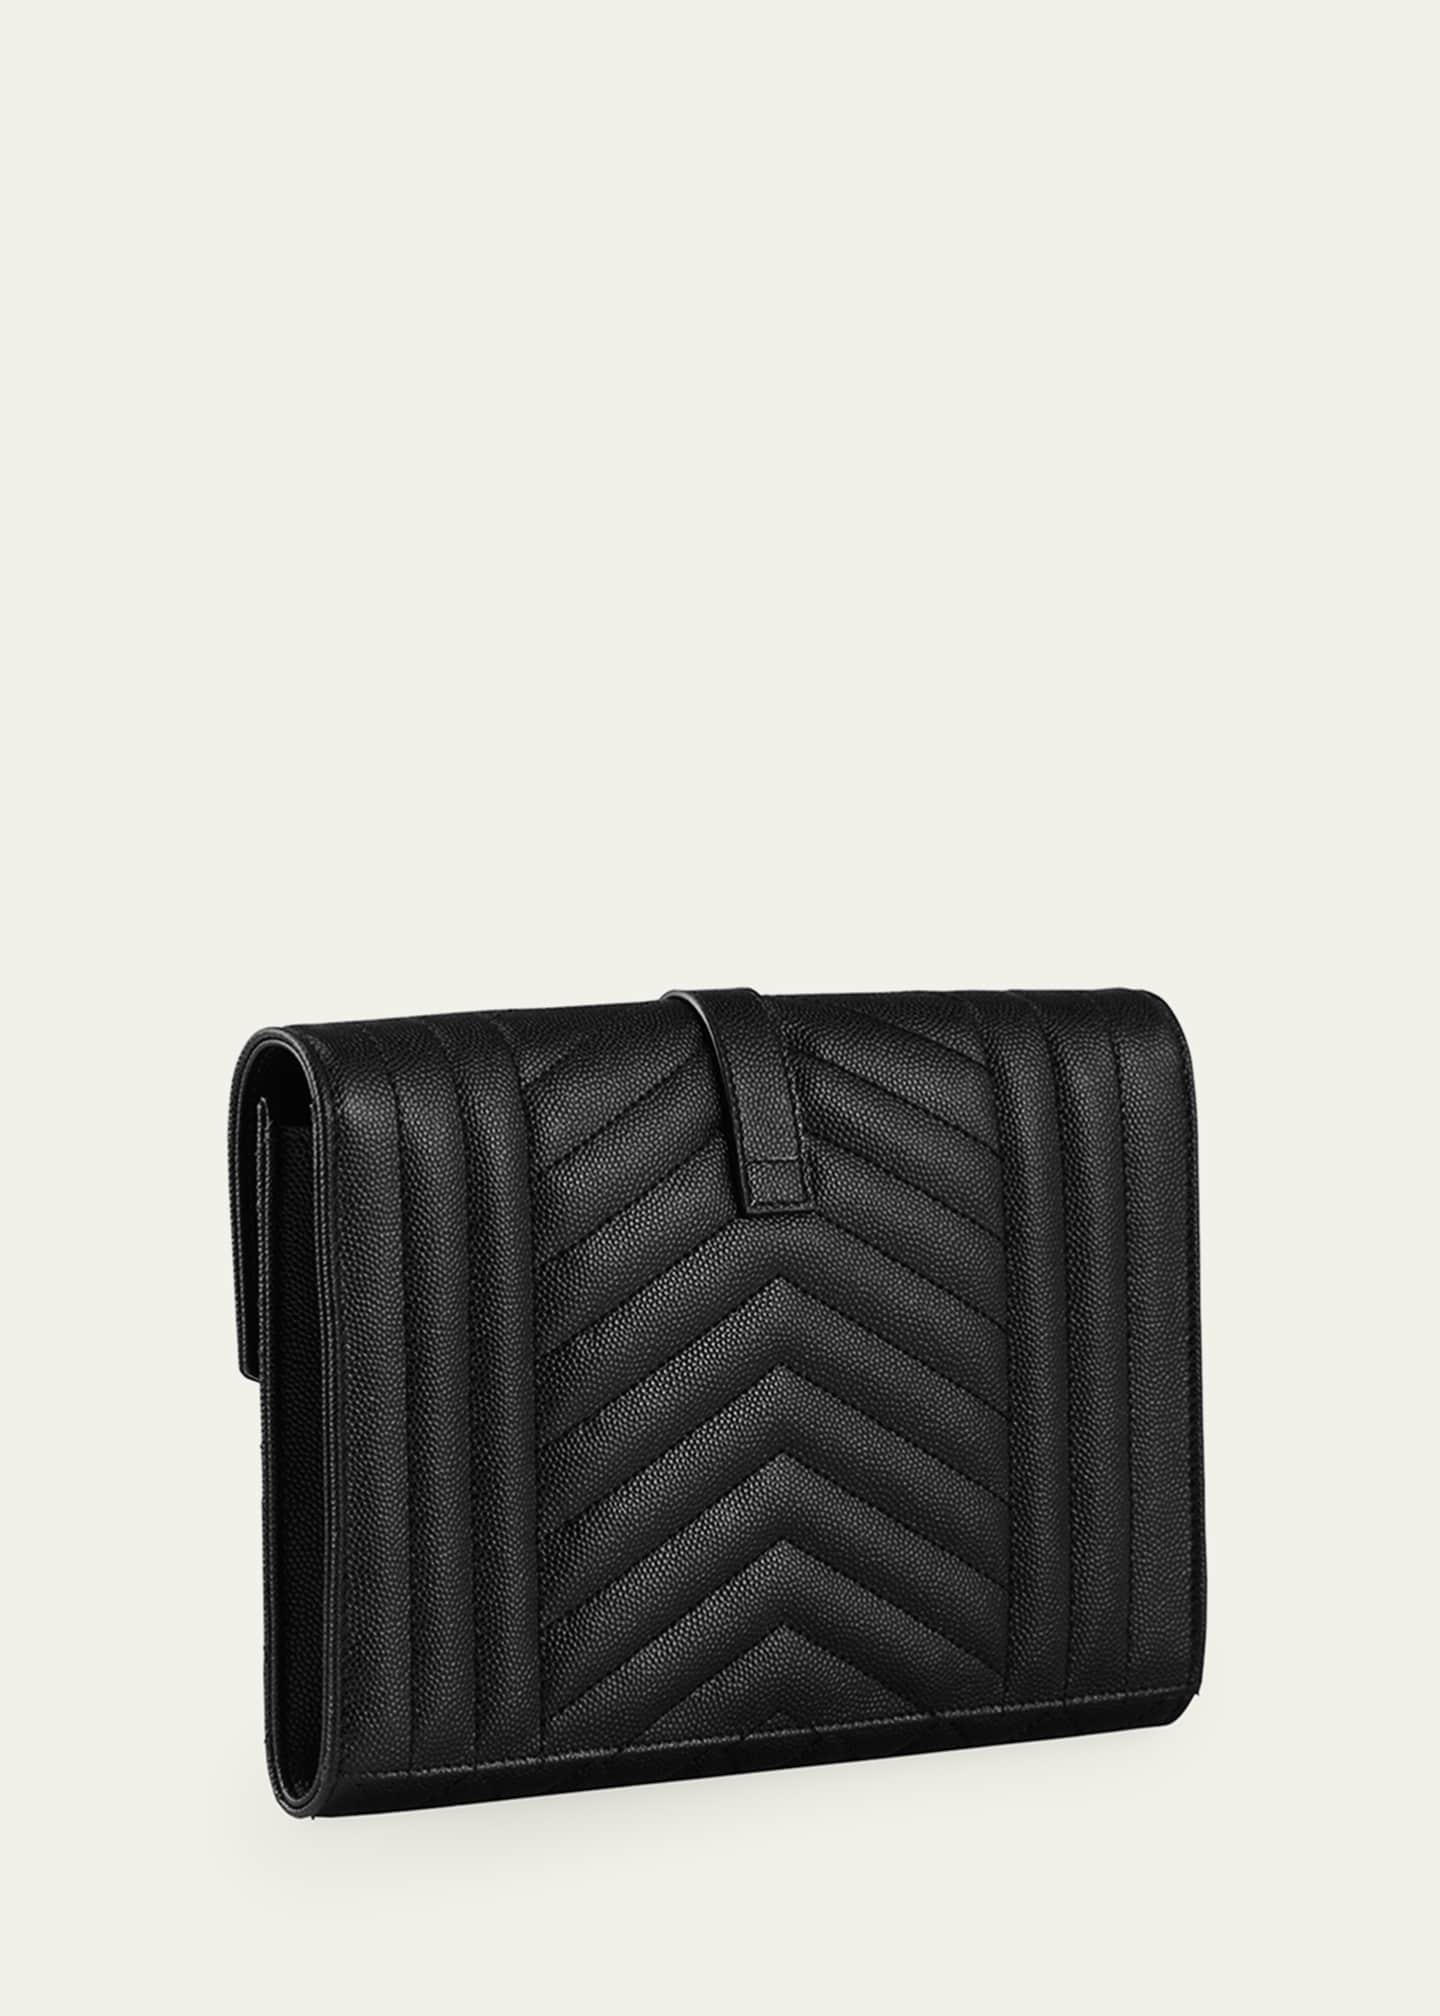 monogram quilted leather envelope clutch